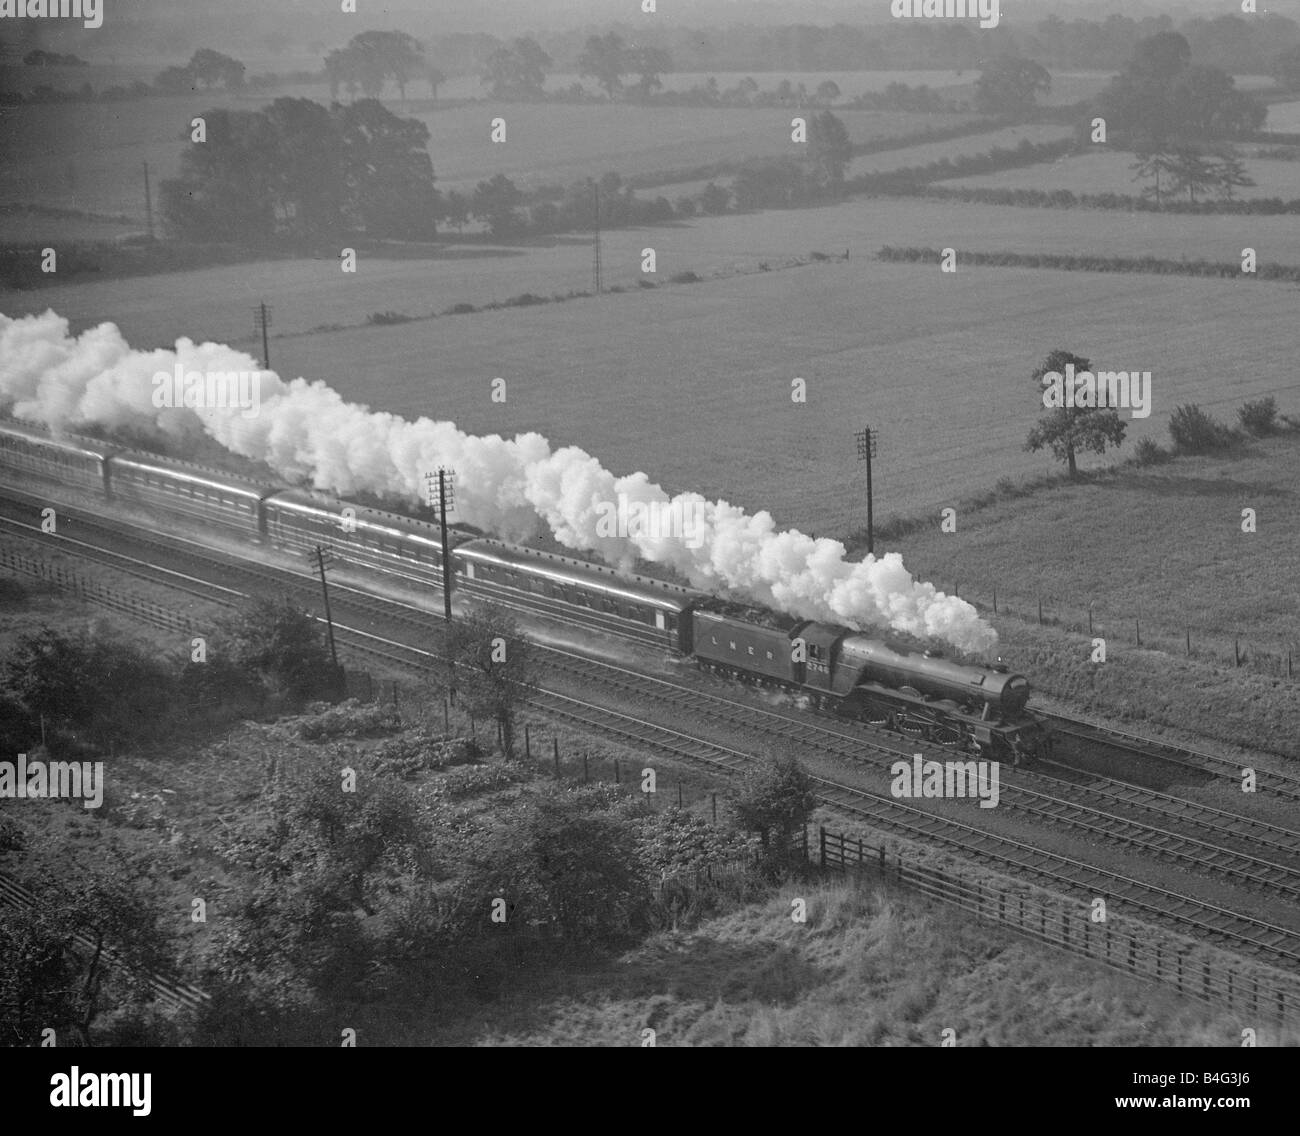 LNER Pacific Steam Locomotive at full speed leaving a trail of smoke as it races through the Hertfordshire countryside Stock Photo